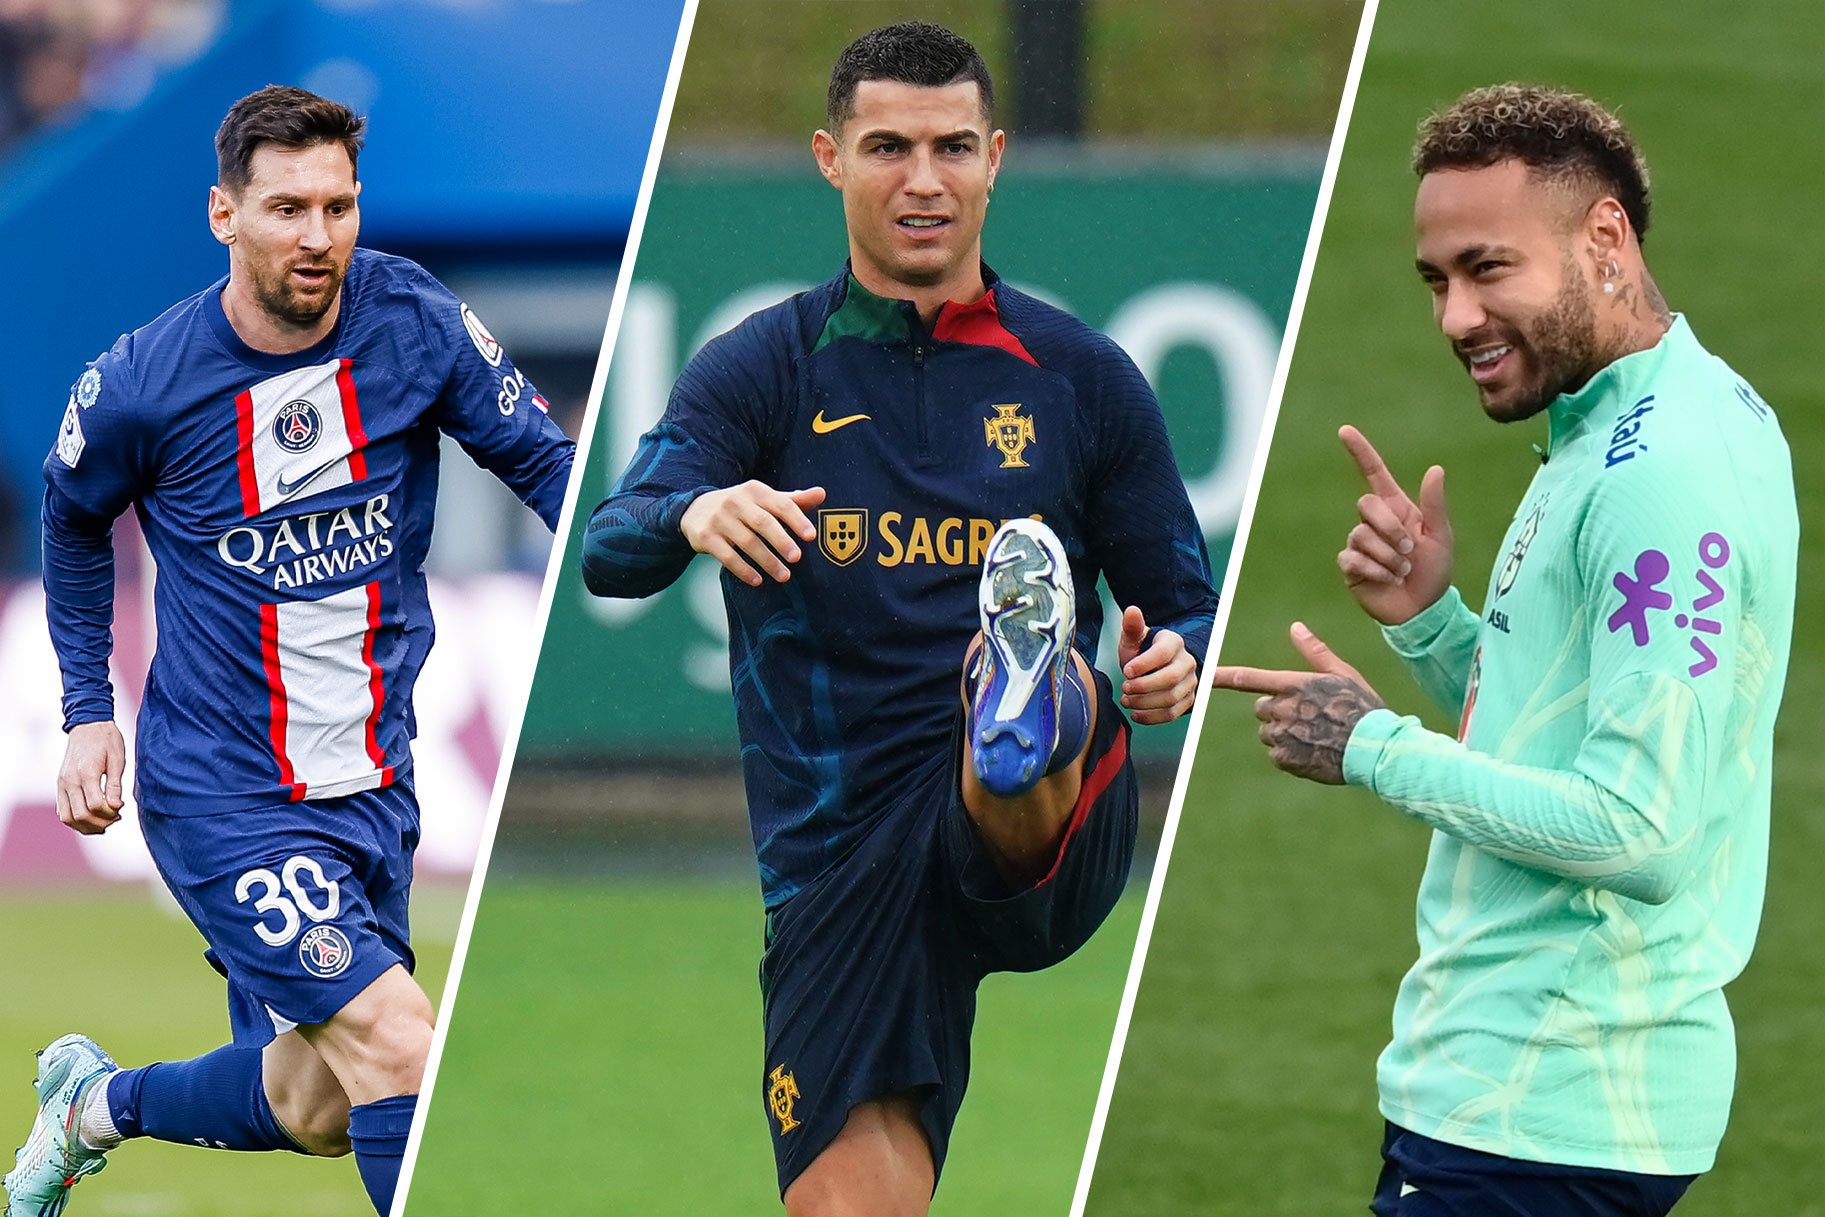 Who's Going To The World Cup? Here Are 8 Stars To Follow